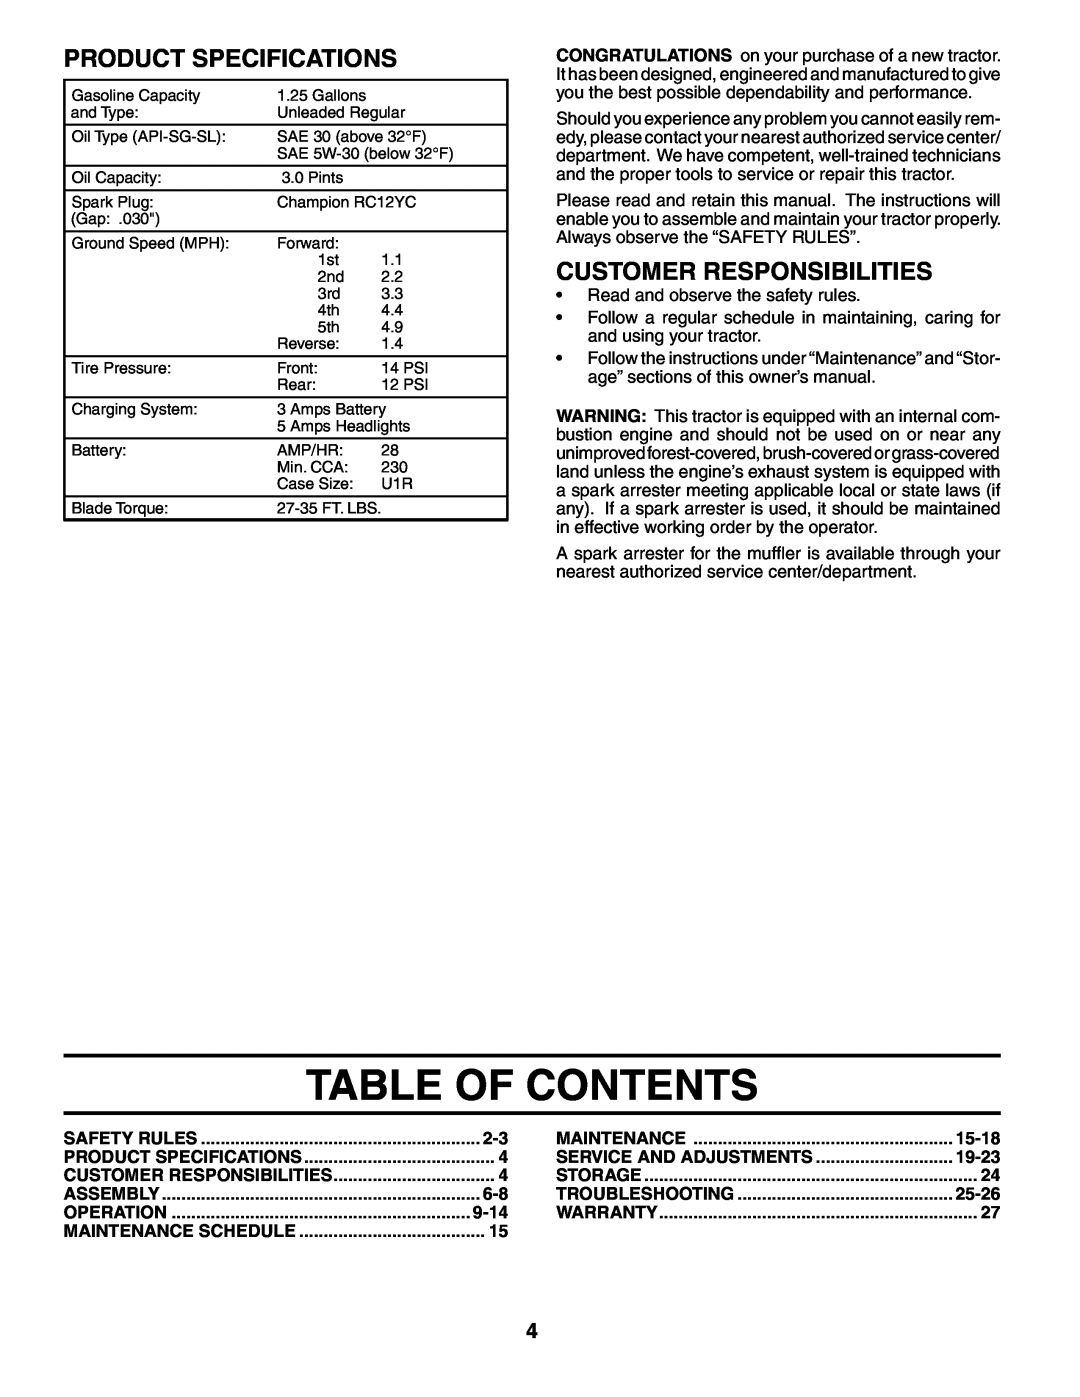 Poulan WE13538LT manual Table Of Contents, Product Specifications, Customer Responsibilities, 9-14, 15-18, 19-23, 25-26 